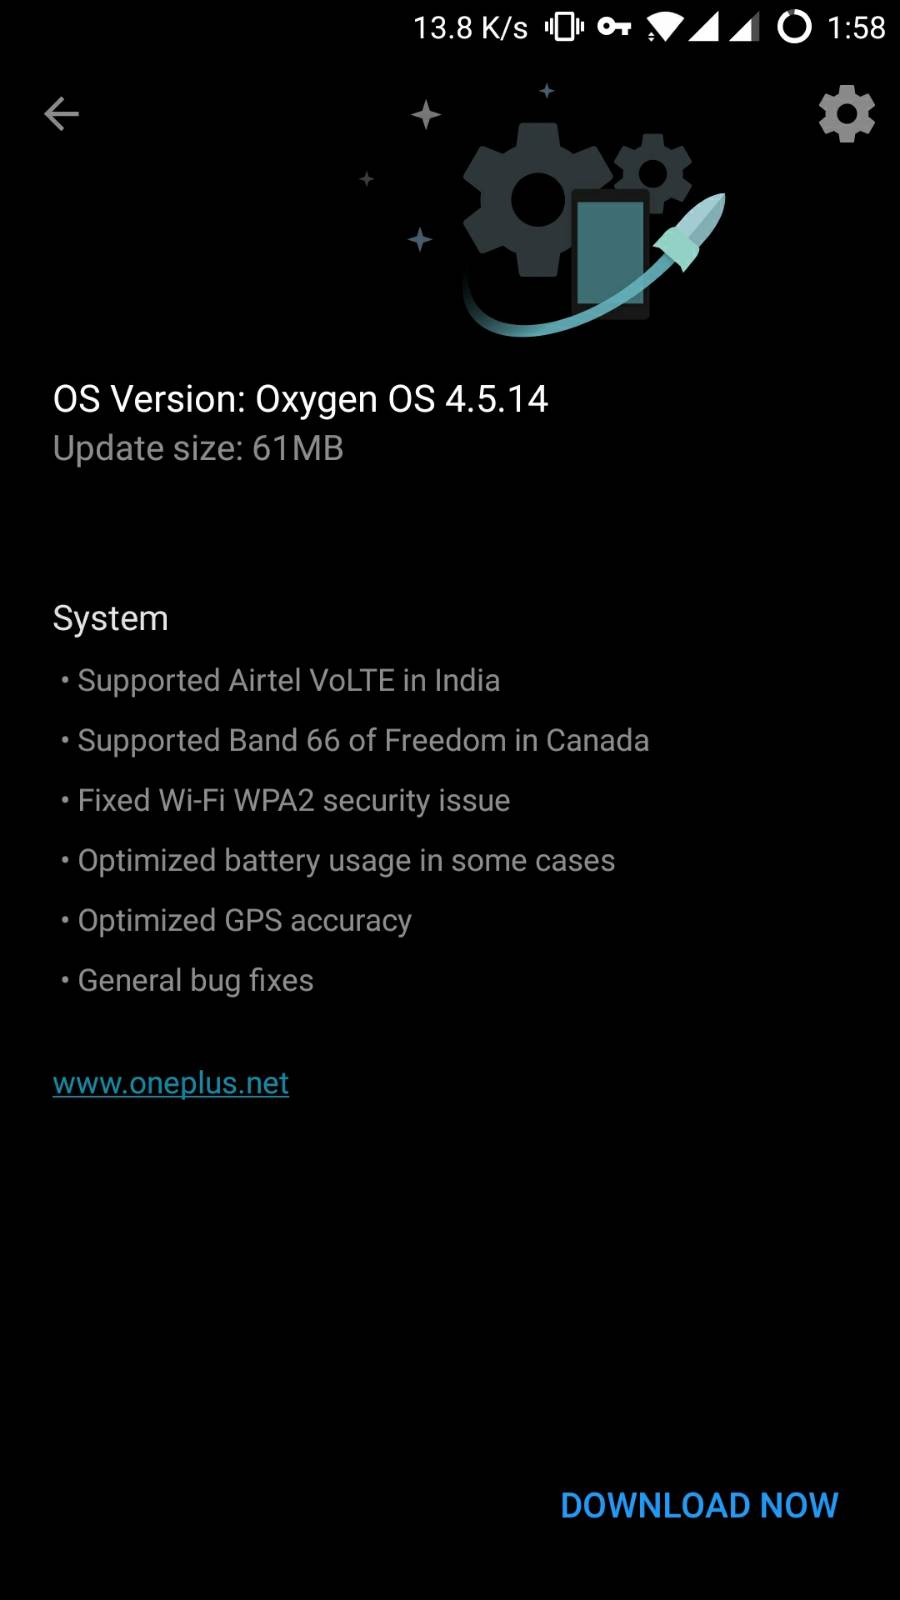 oxygenos 4.5.14 ota rolling out on oneplus 5